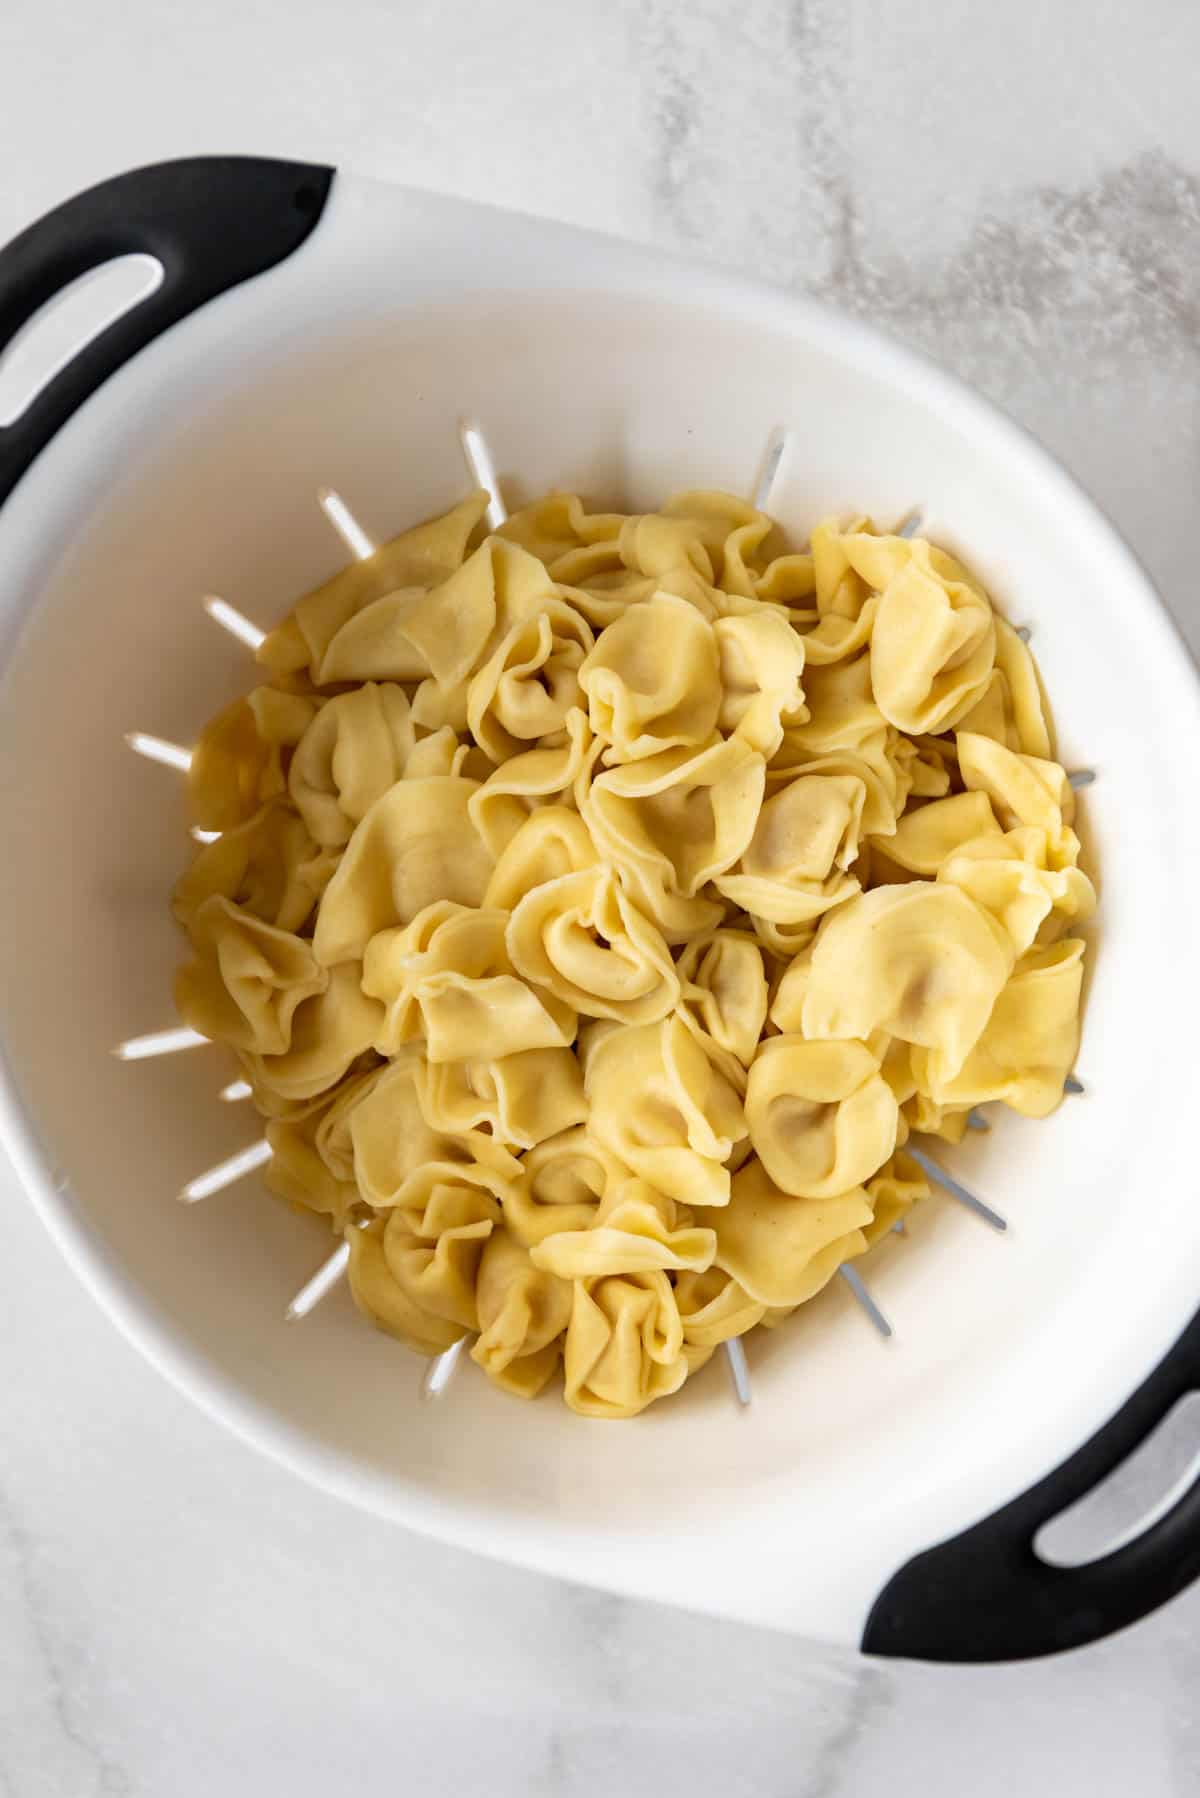 Cooked cheese tortellini pasta in a colander.